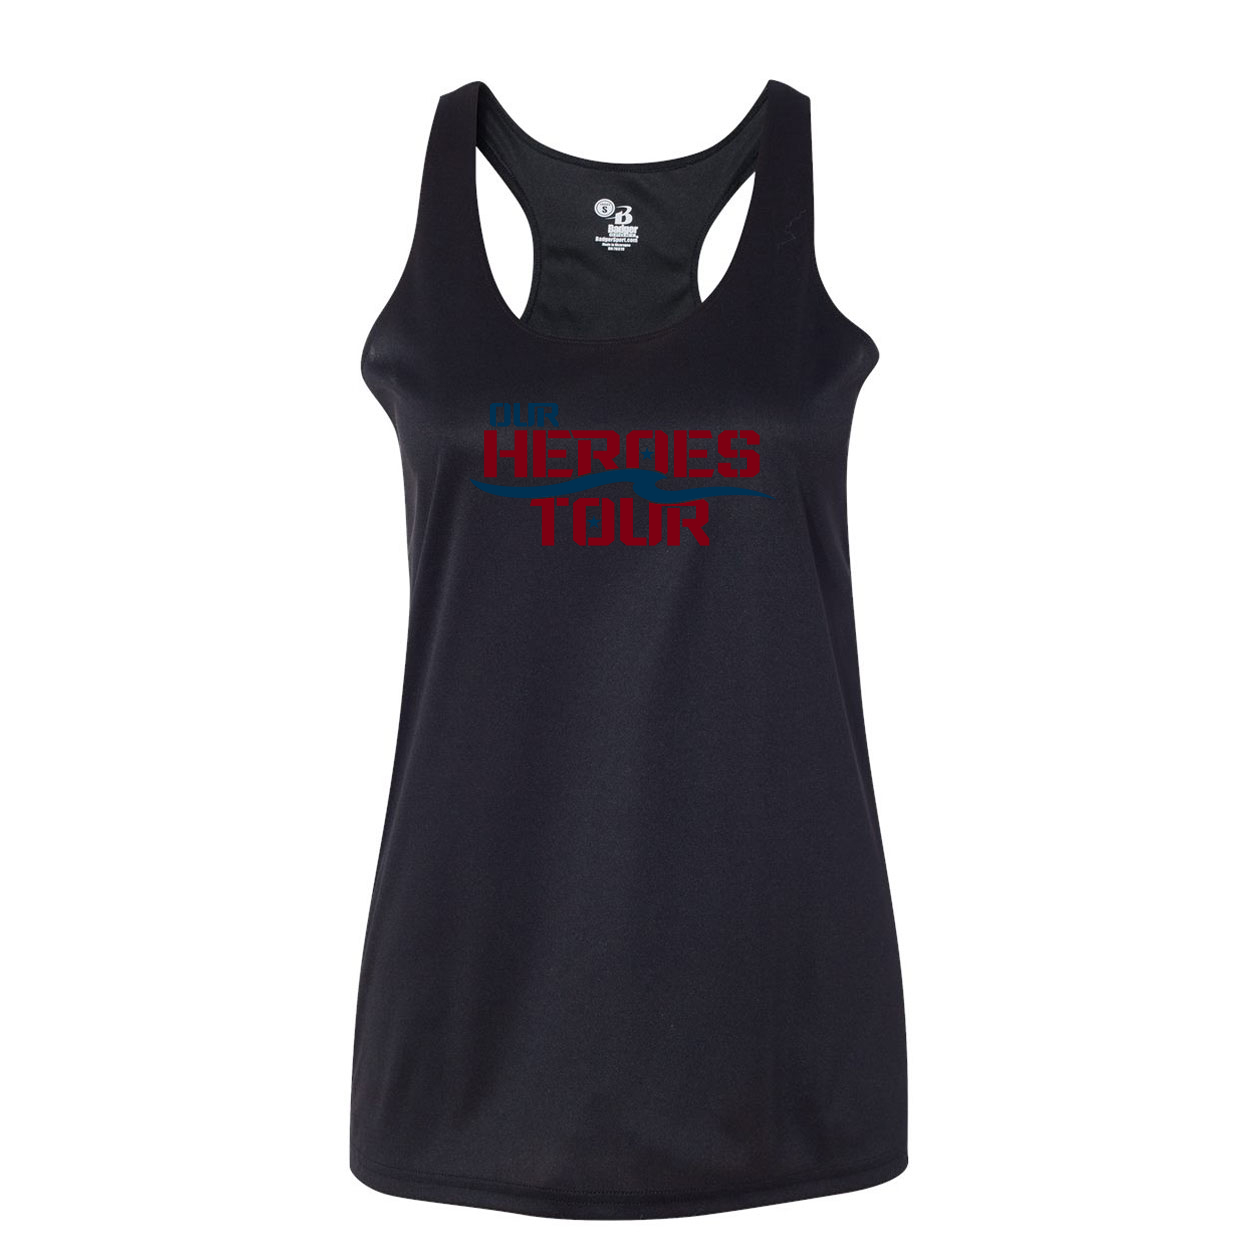 Our Heroes Tour Classic Womens Performance Racerback Tank Top Black (White Logo)